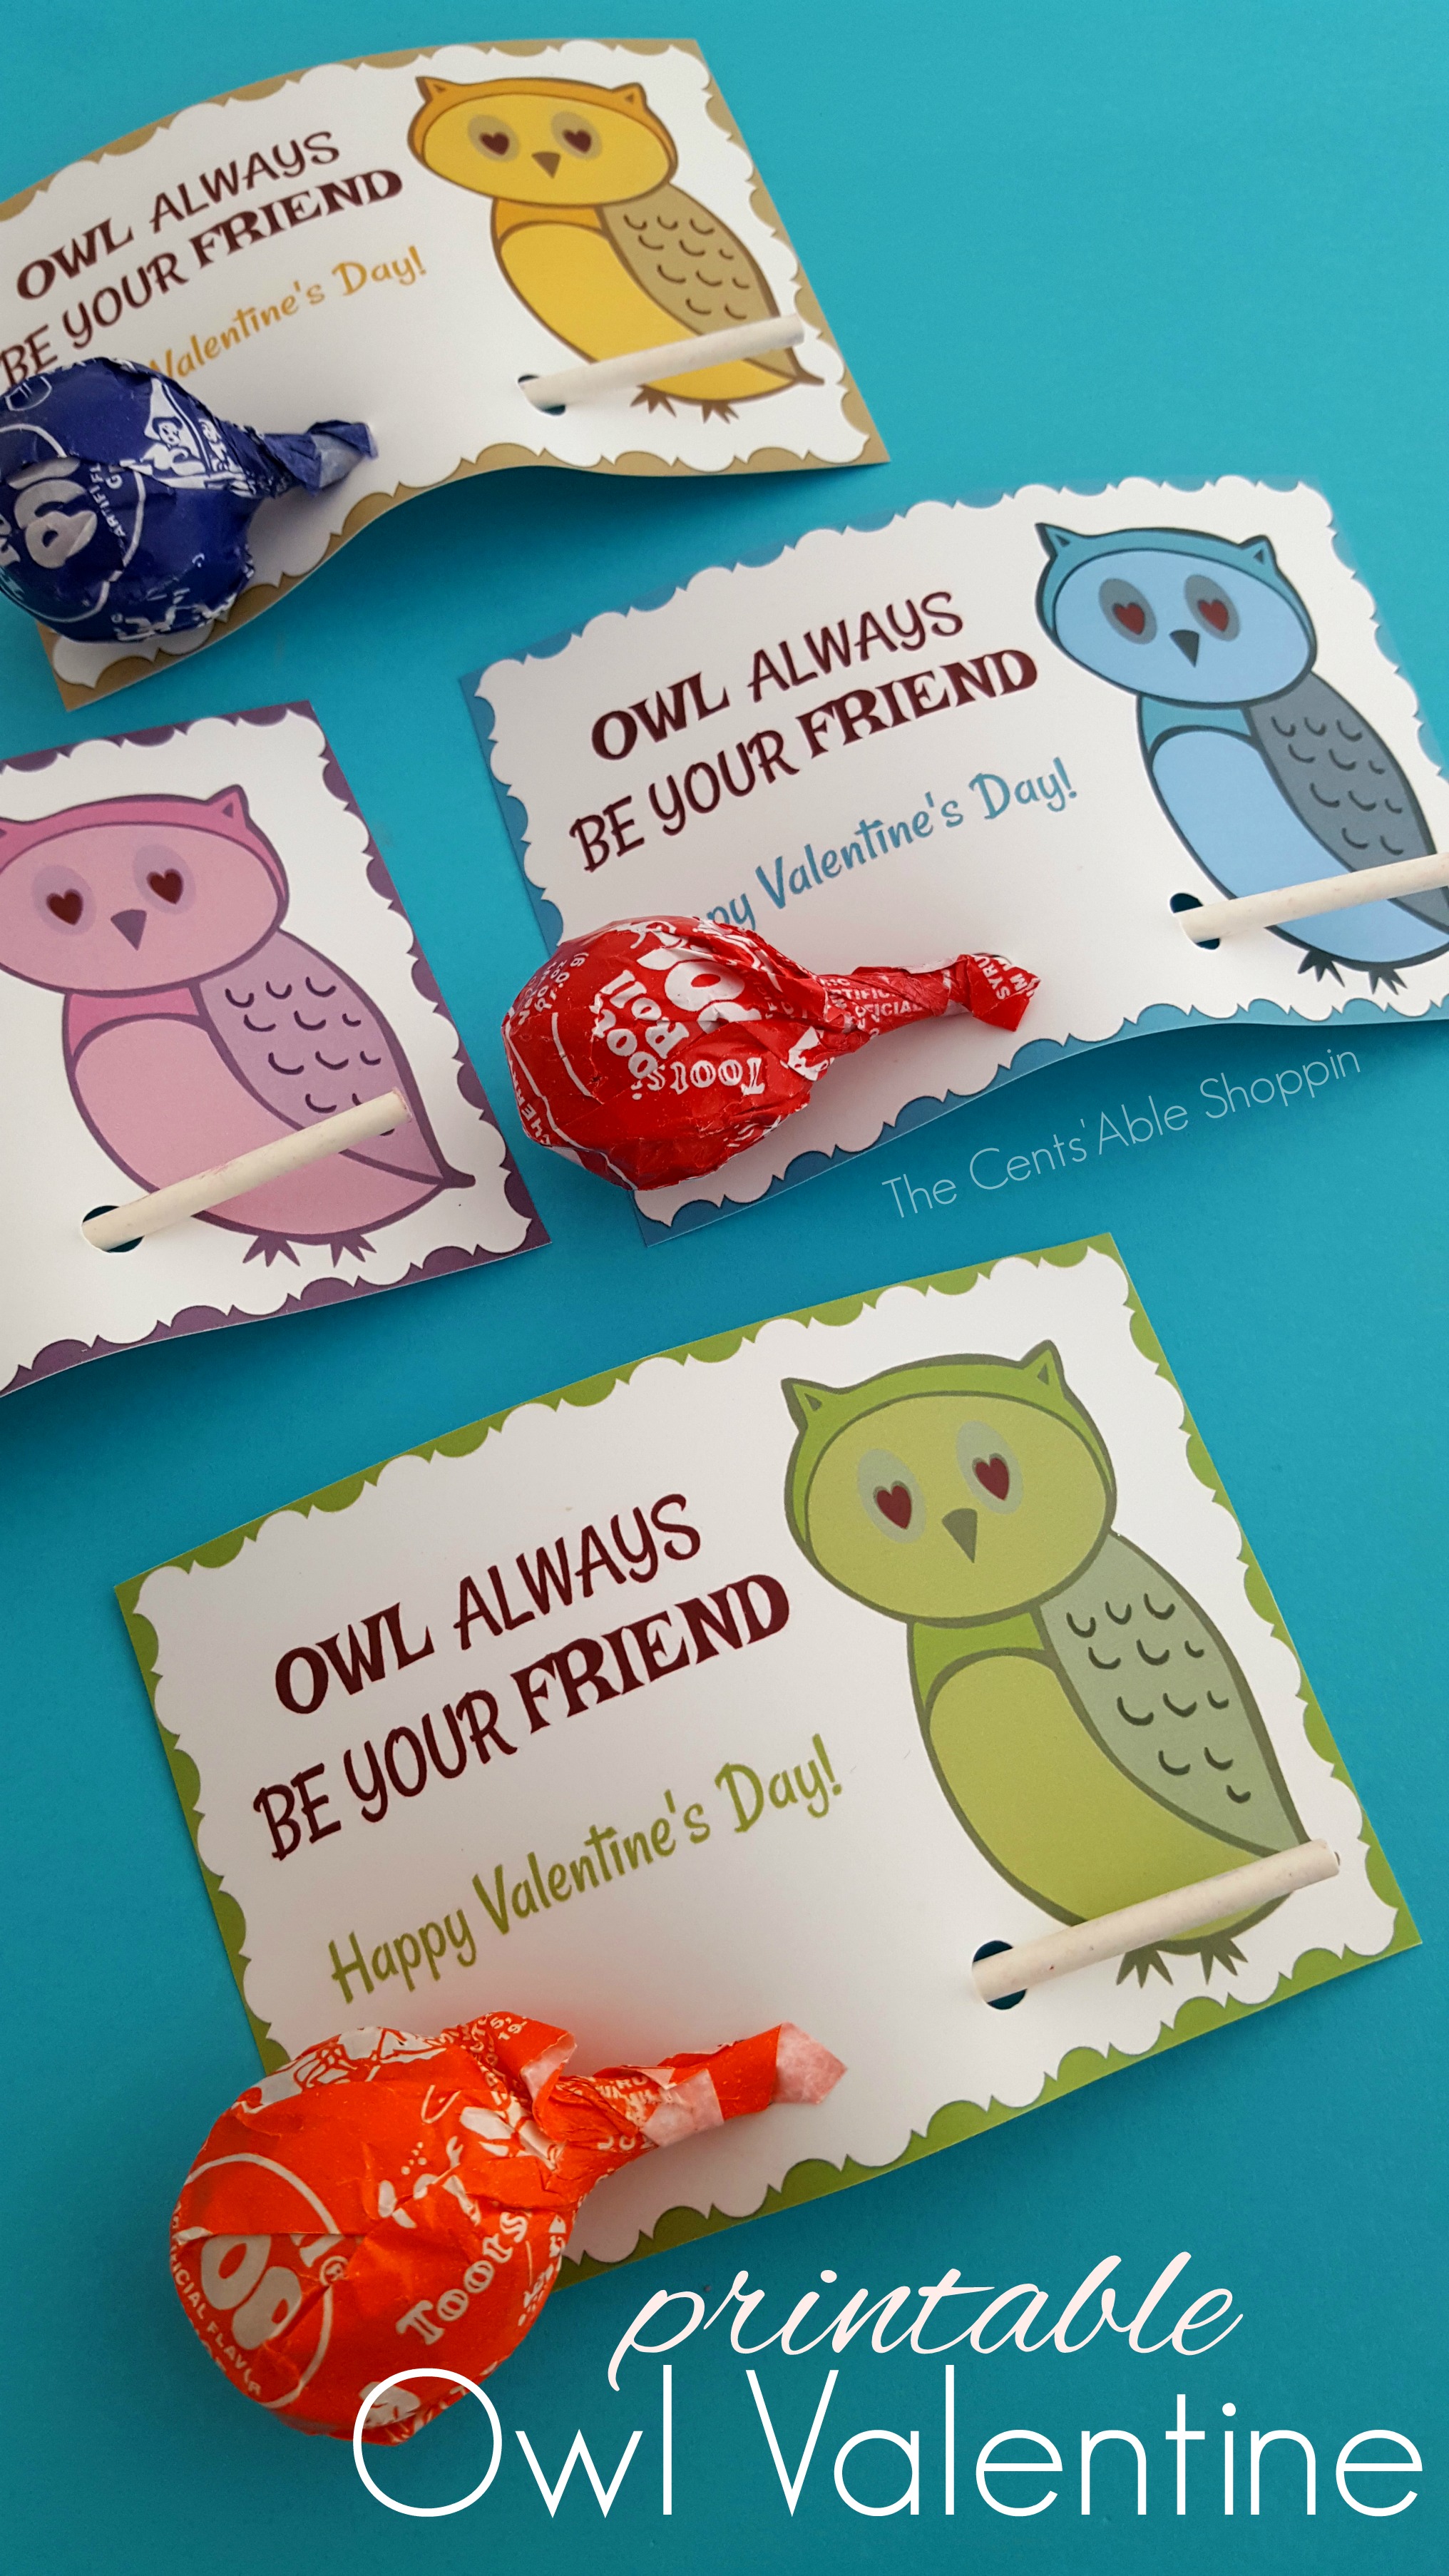 Grab these free Owl printable Valentine's Cards and attach a tootsie roll pop - they'll be a big hit for your child's next Valentine's party!